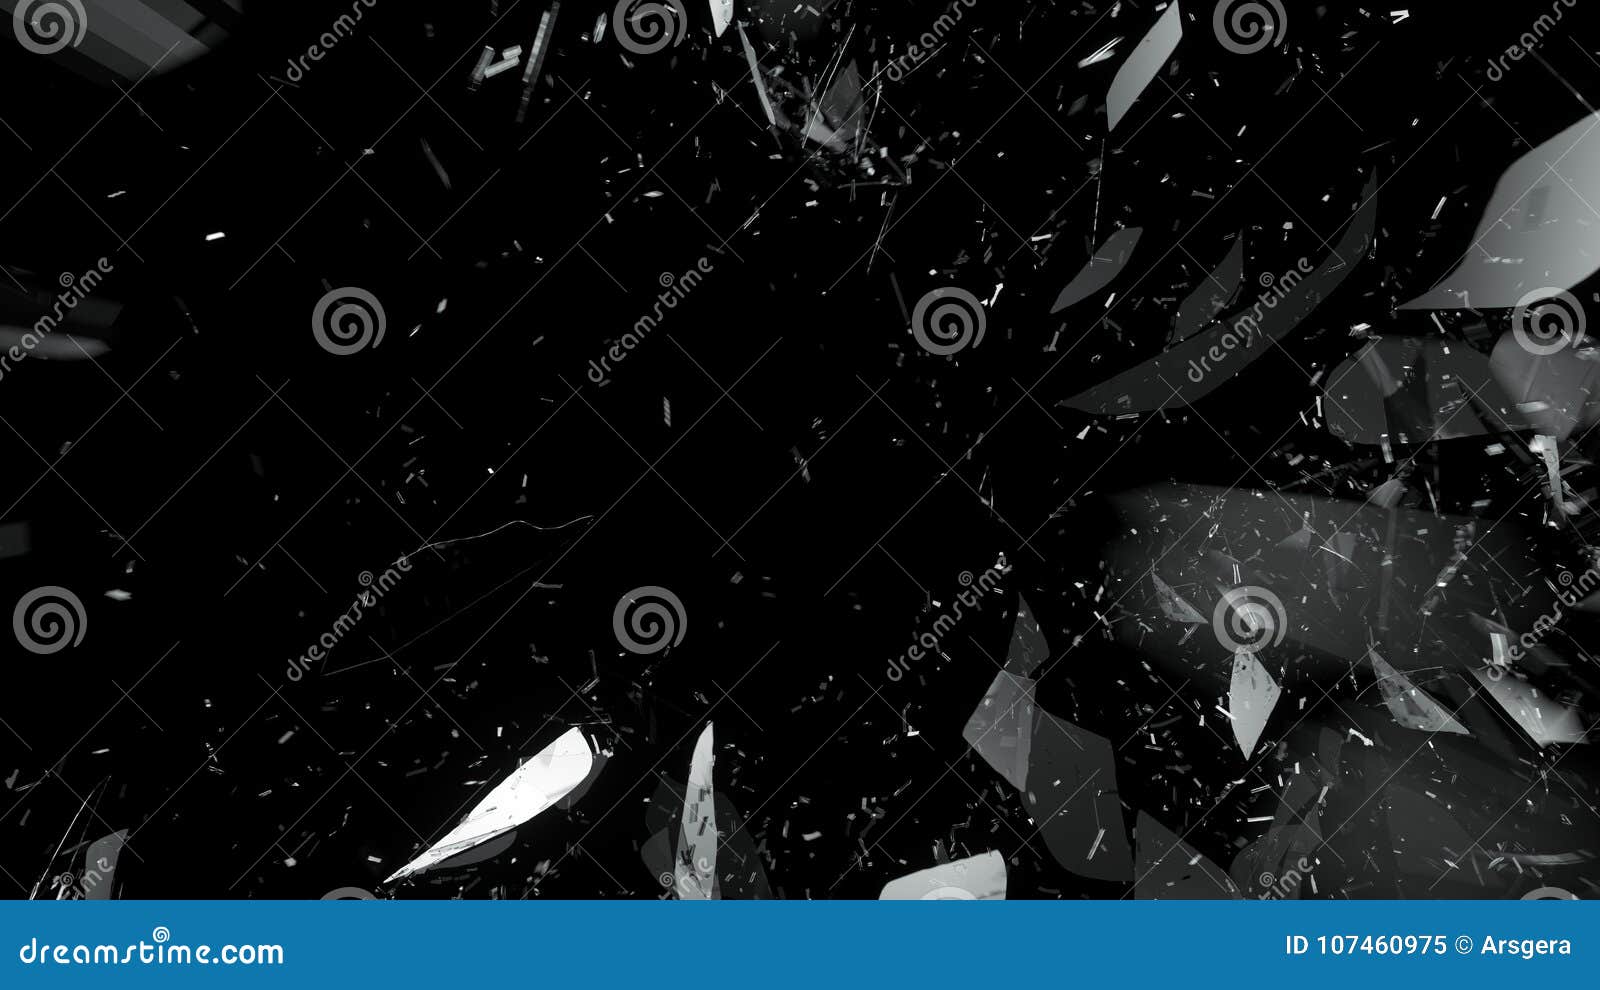 https://thumbs.dreamstime.com/z/pieces-splitted-broken-glass-black-large-resolution-pieces-splitted-broken-glass-black-107460975.jpg